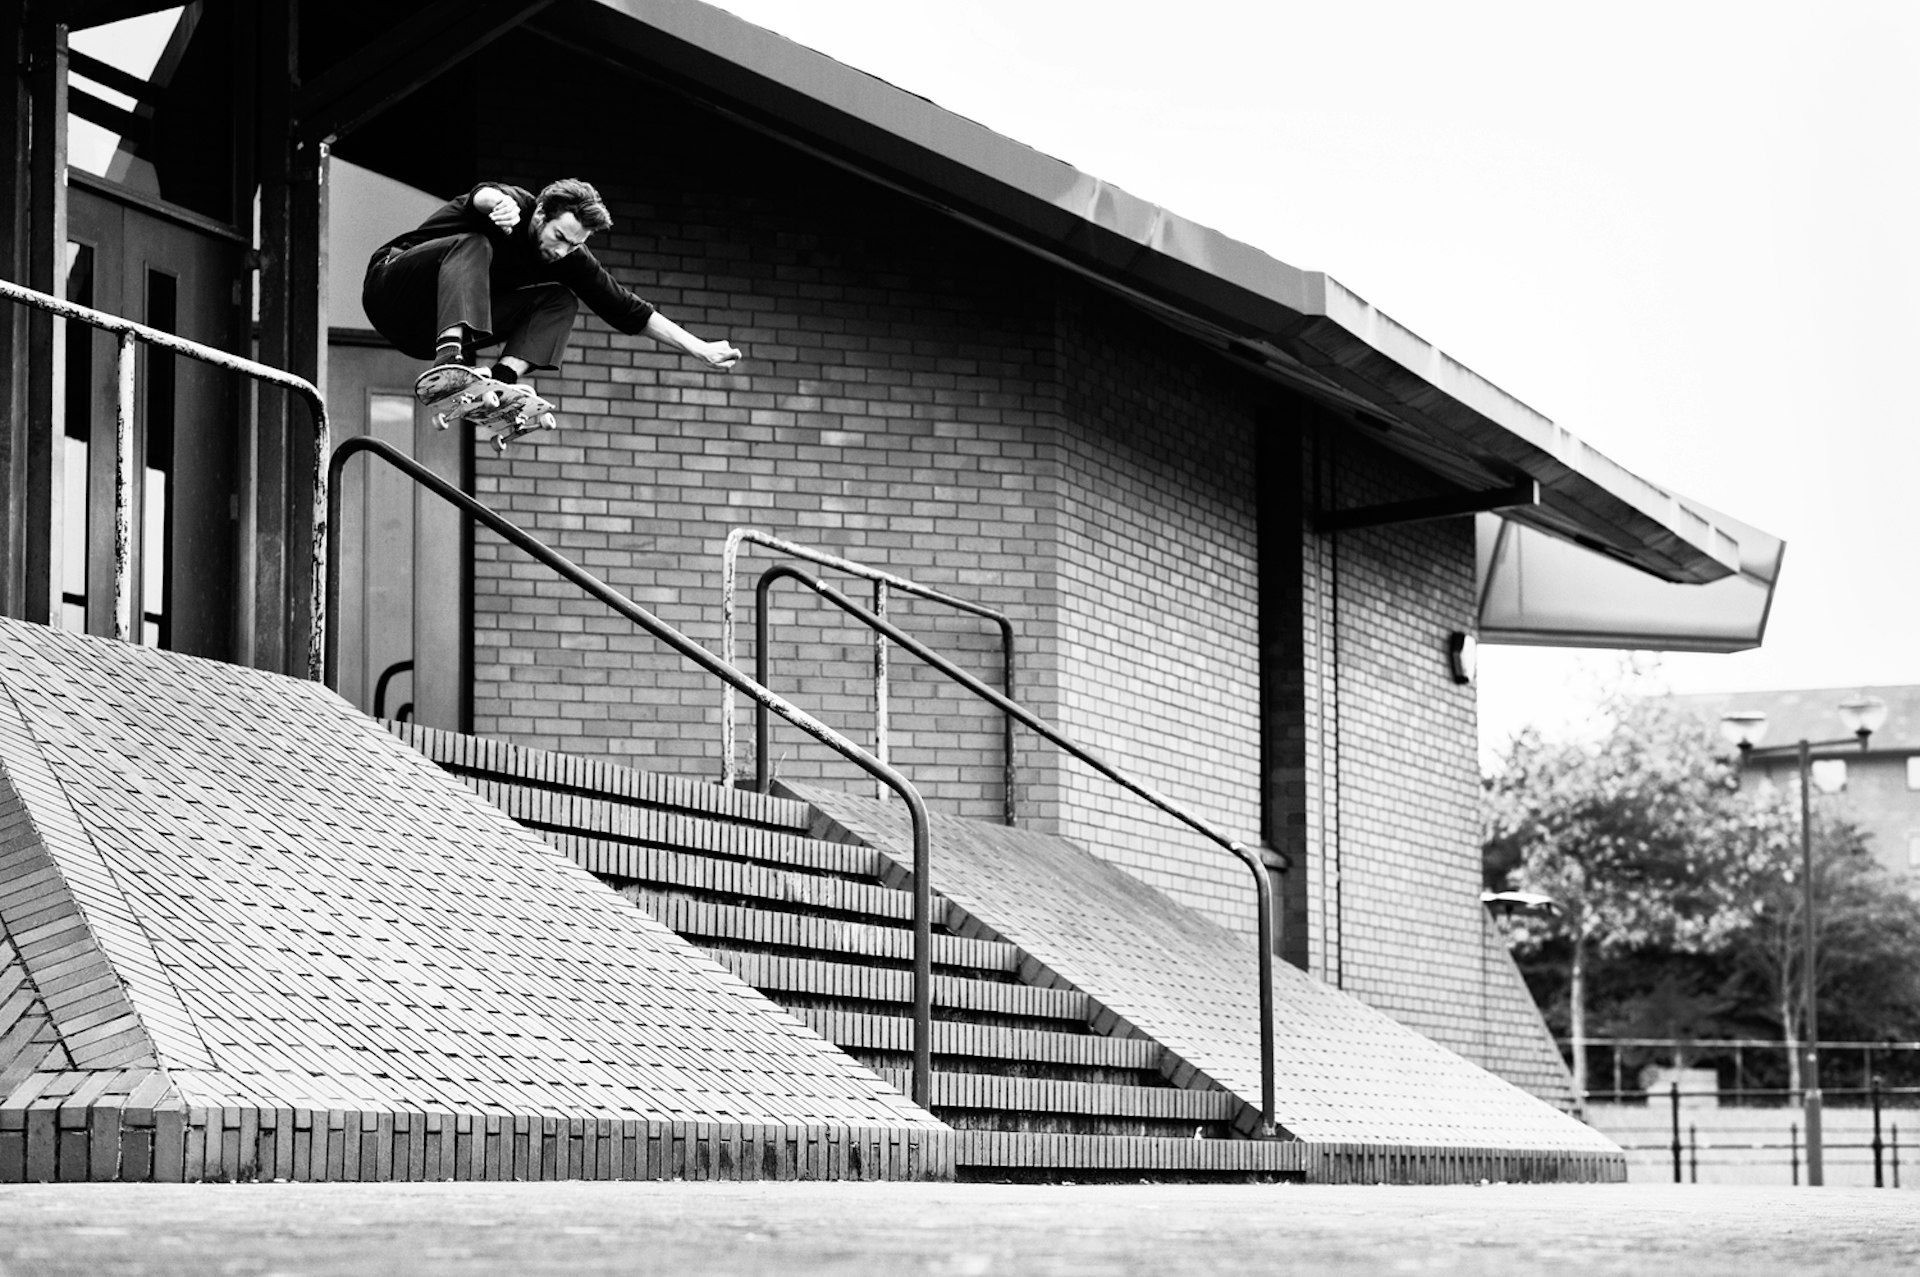 Village hills, crusty banks and going ham: Skating South Wales with Chris Jones